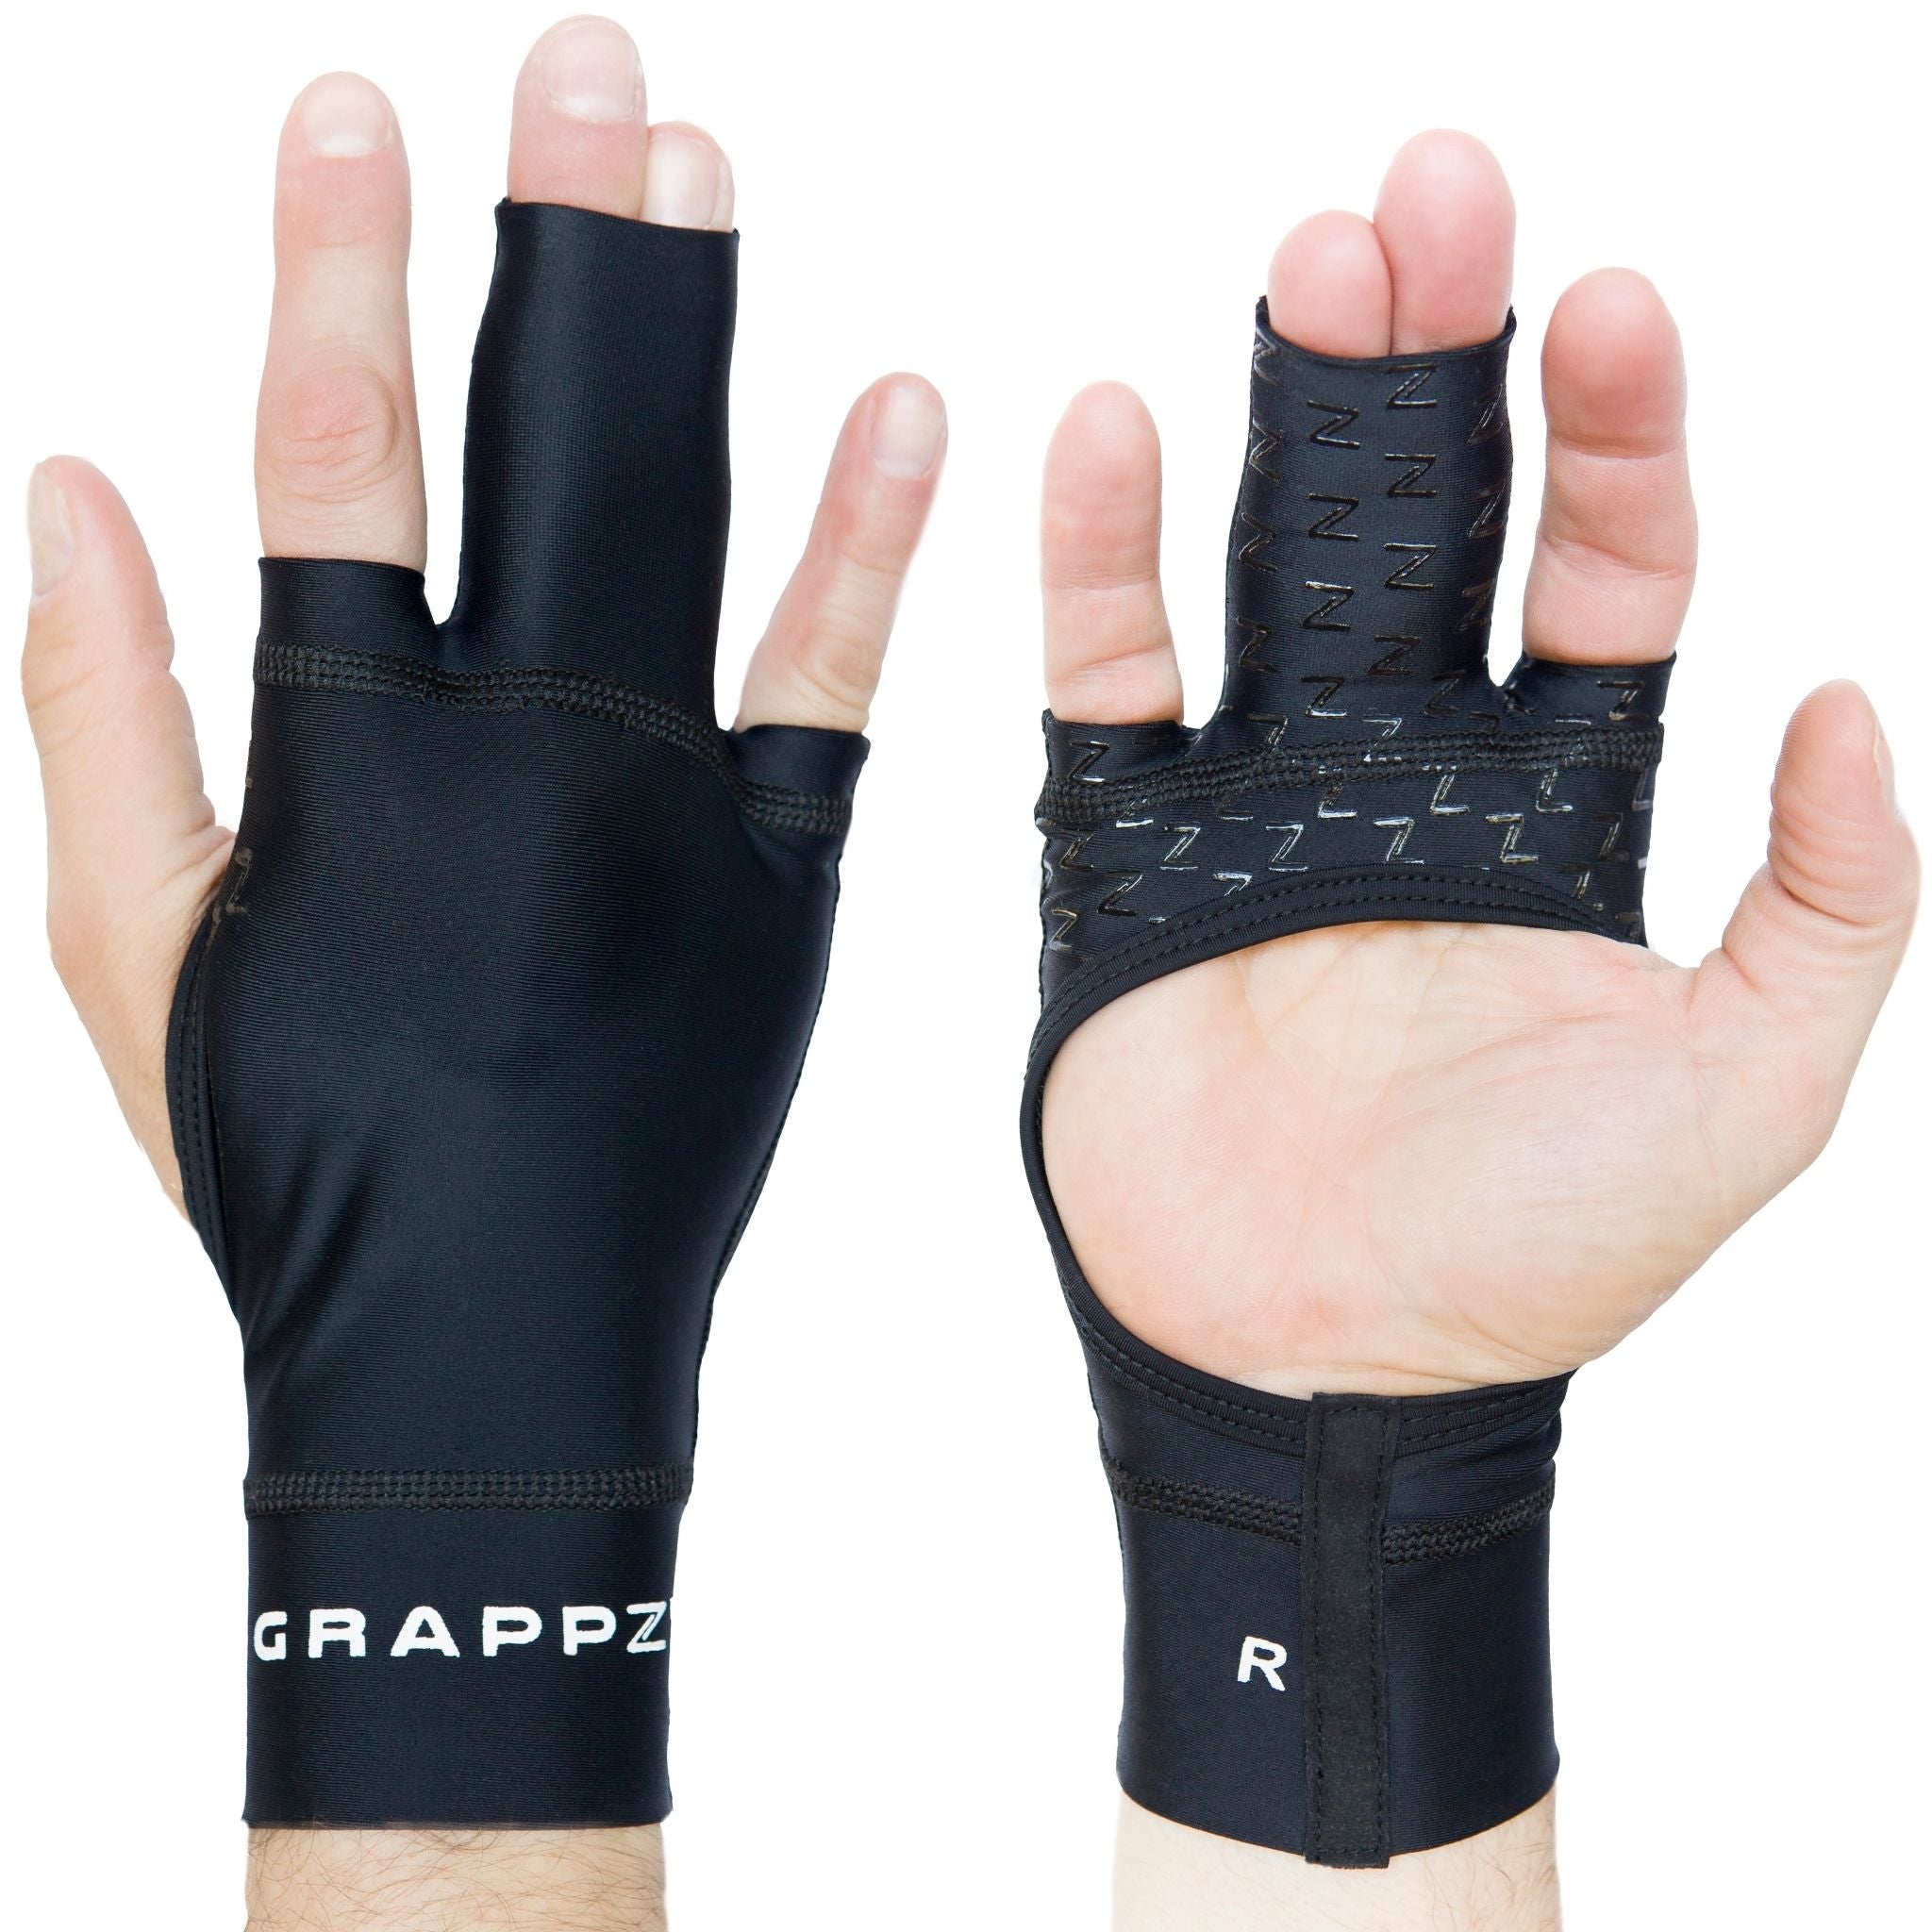 Finger Support Compression glove improves strength & performance – GRAPPZ